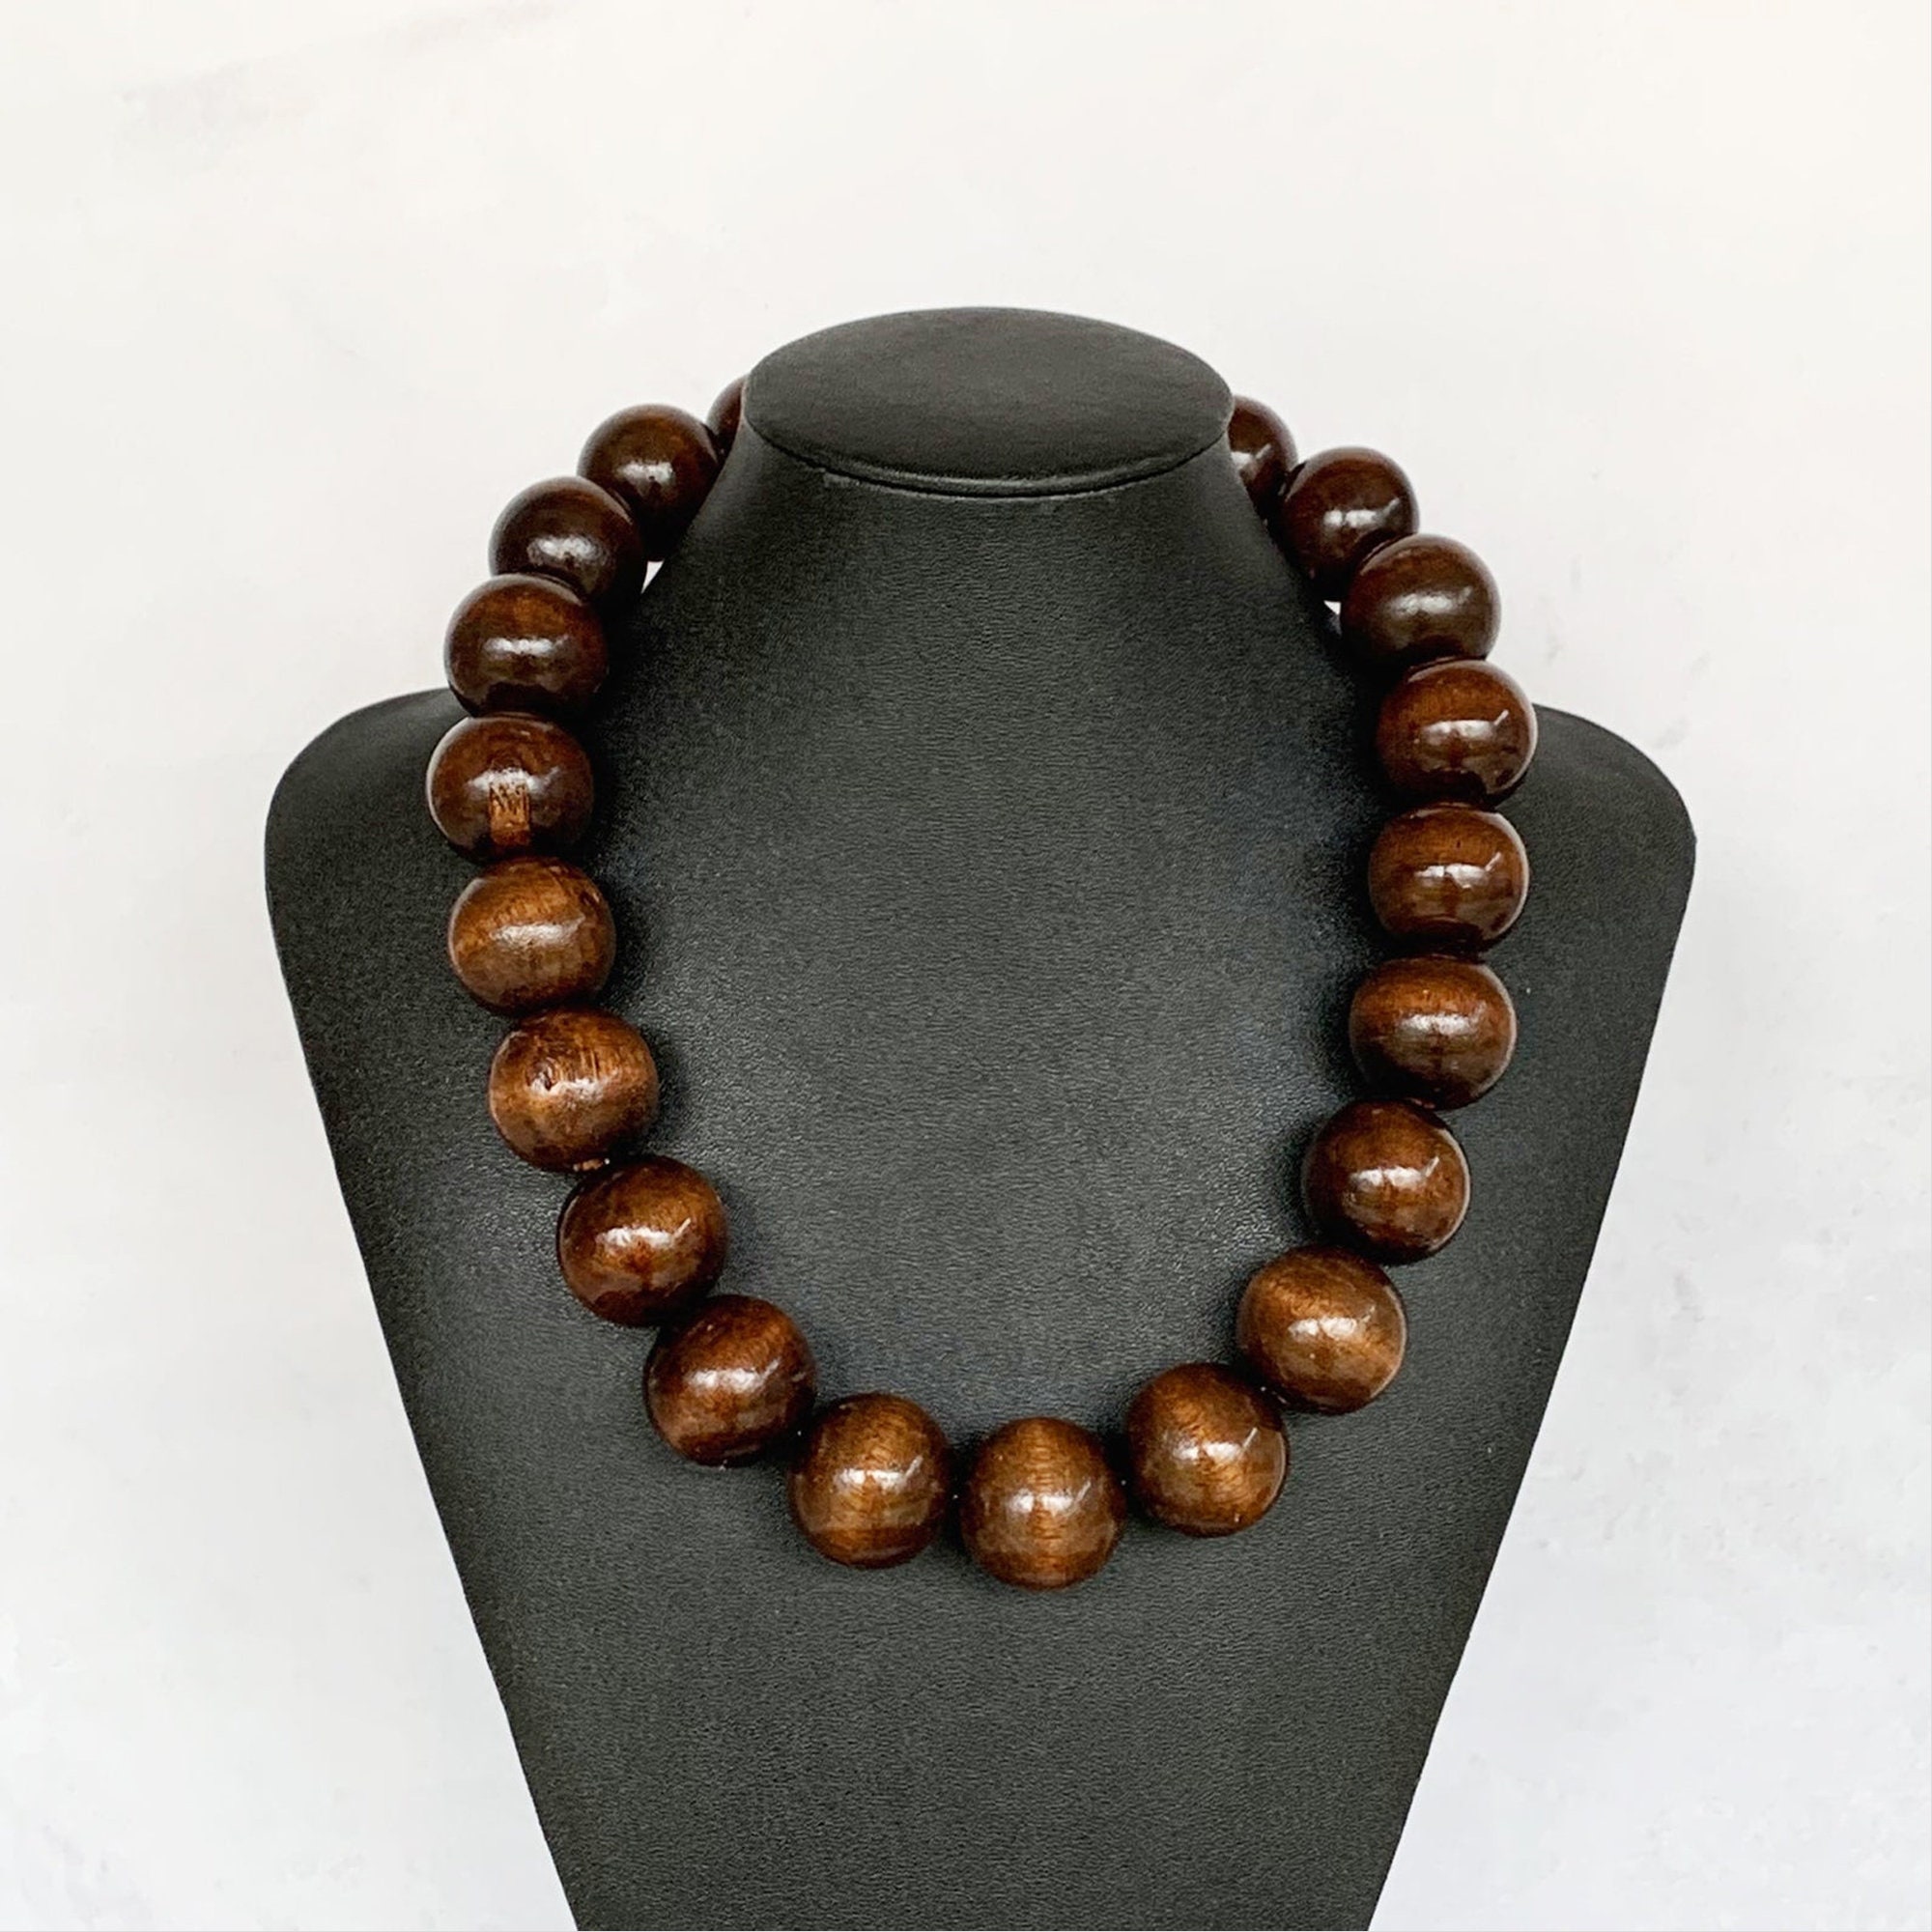 Surfer Phatty Thick Hemp Necklace With Wooden Beads | sunnybeachjewelry-tuongthan.vn